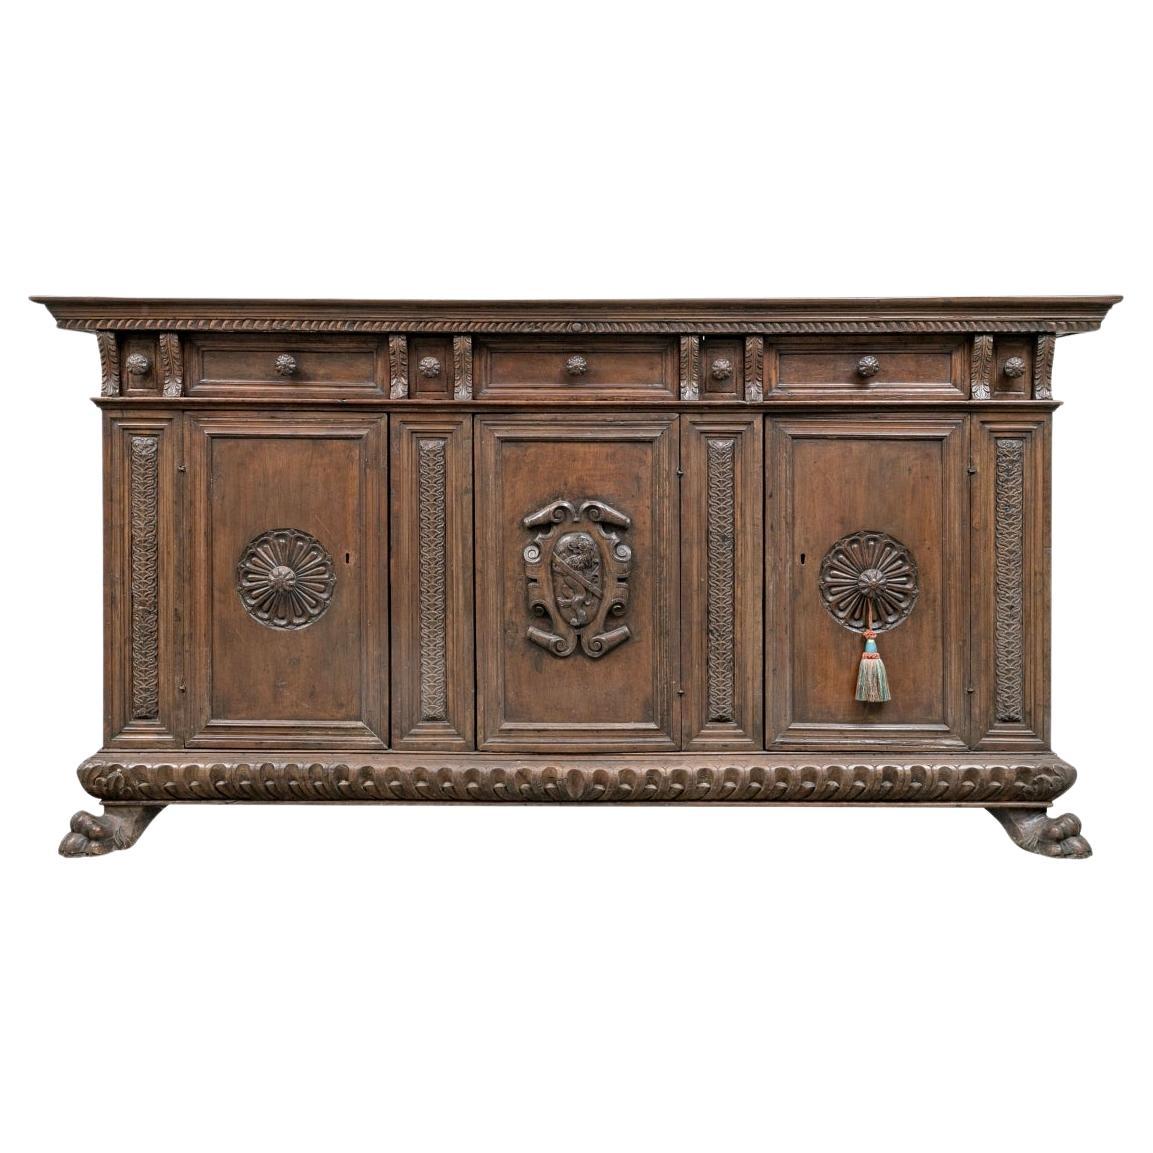 Exceptional Large Antique Italian Renaissance Cabinet With Heraldic Crest  For Sale